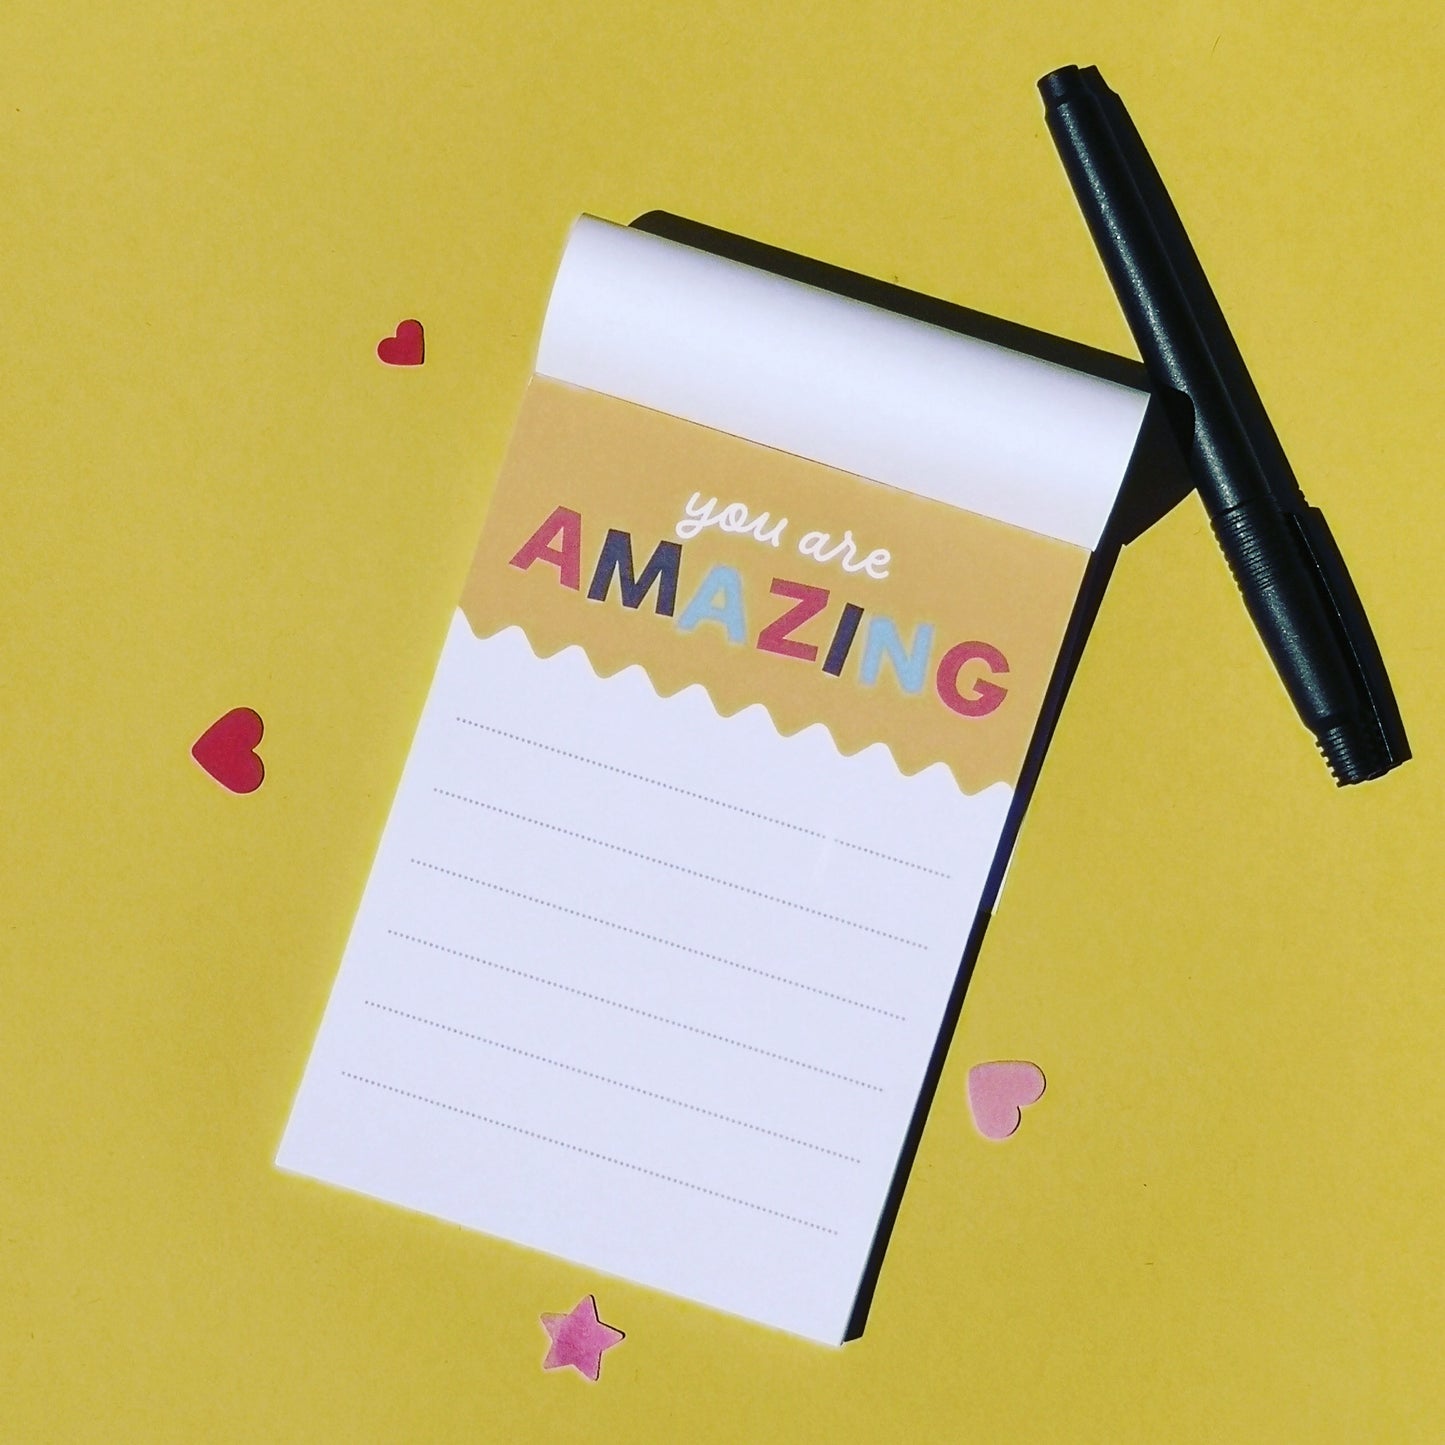 You are Amazing Notepad